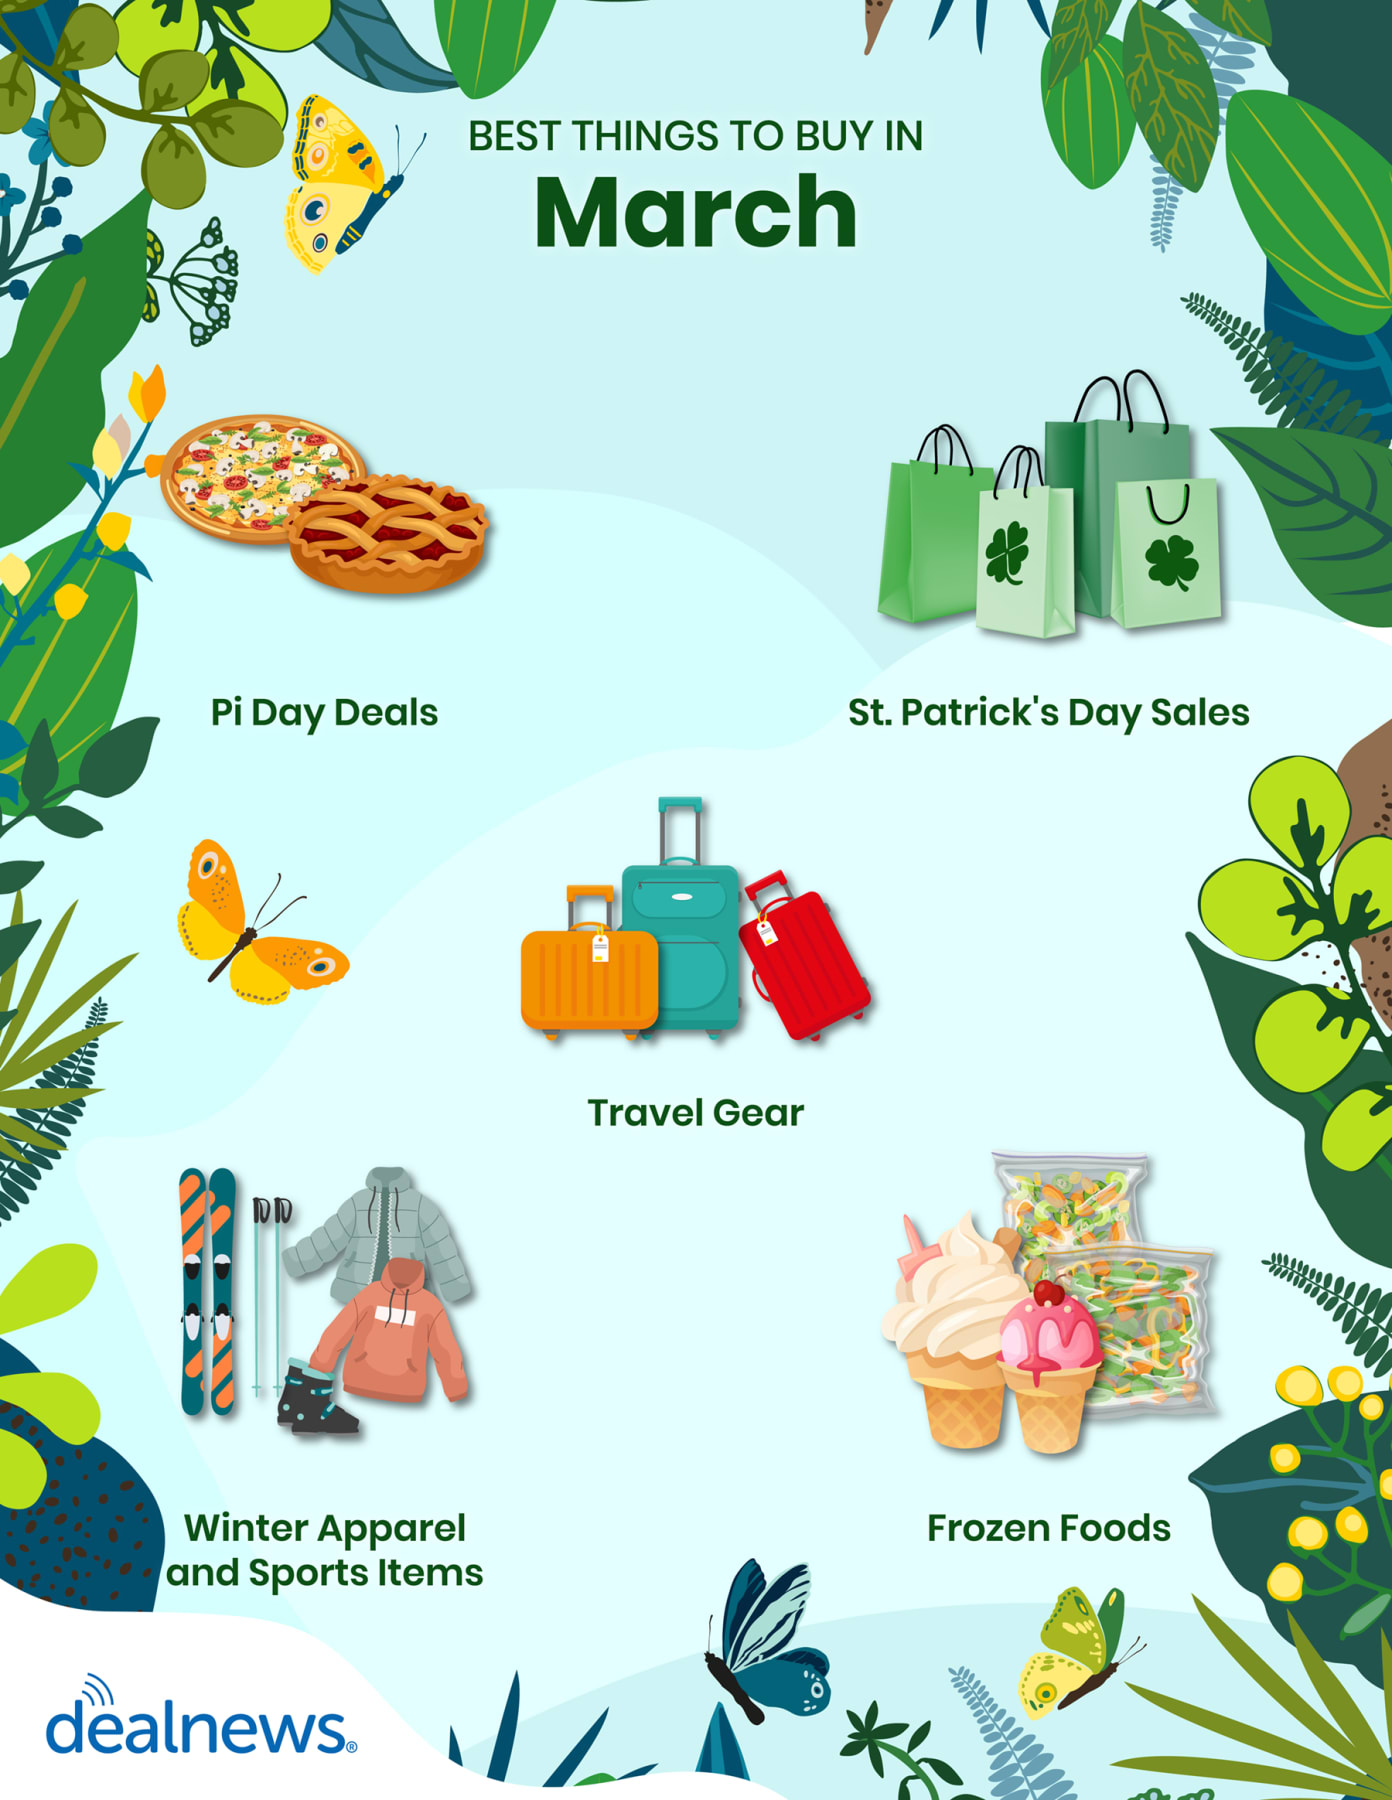 Five of the best things to buy in March depicted in an infographic.